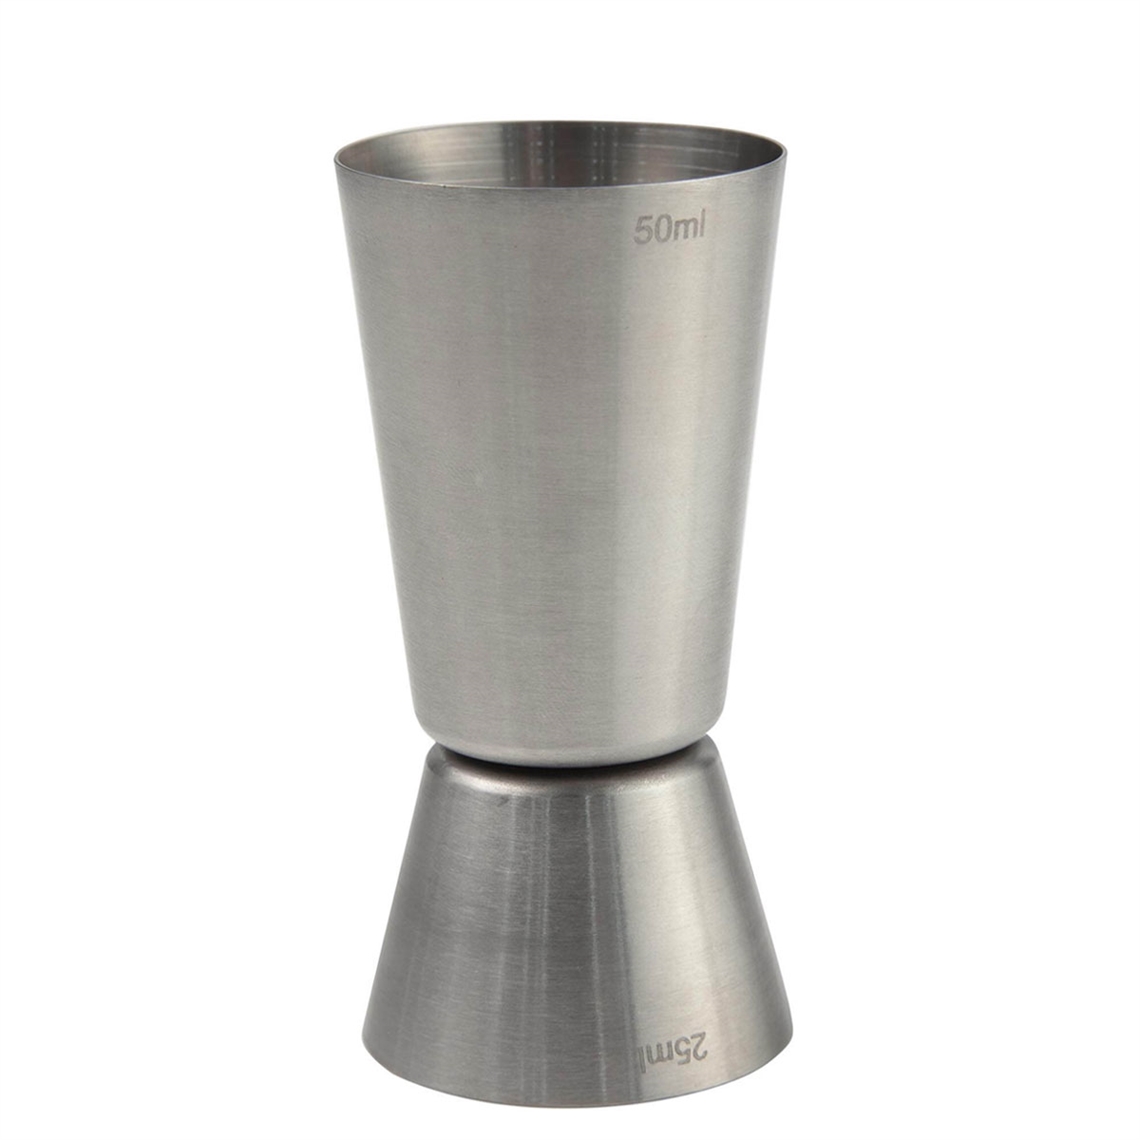 View more bottle coolers from our Spirit and Wine Bar Thimble Measures range